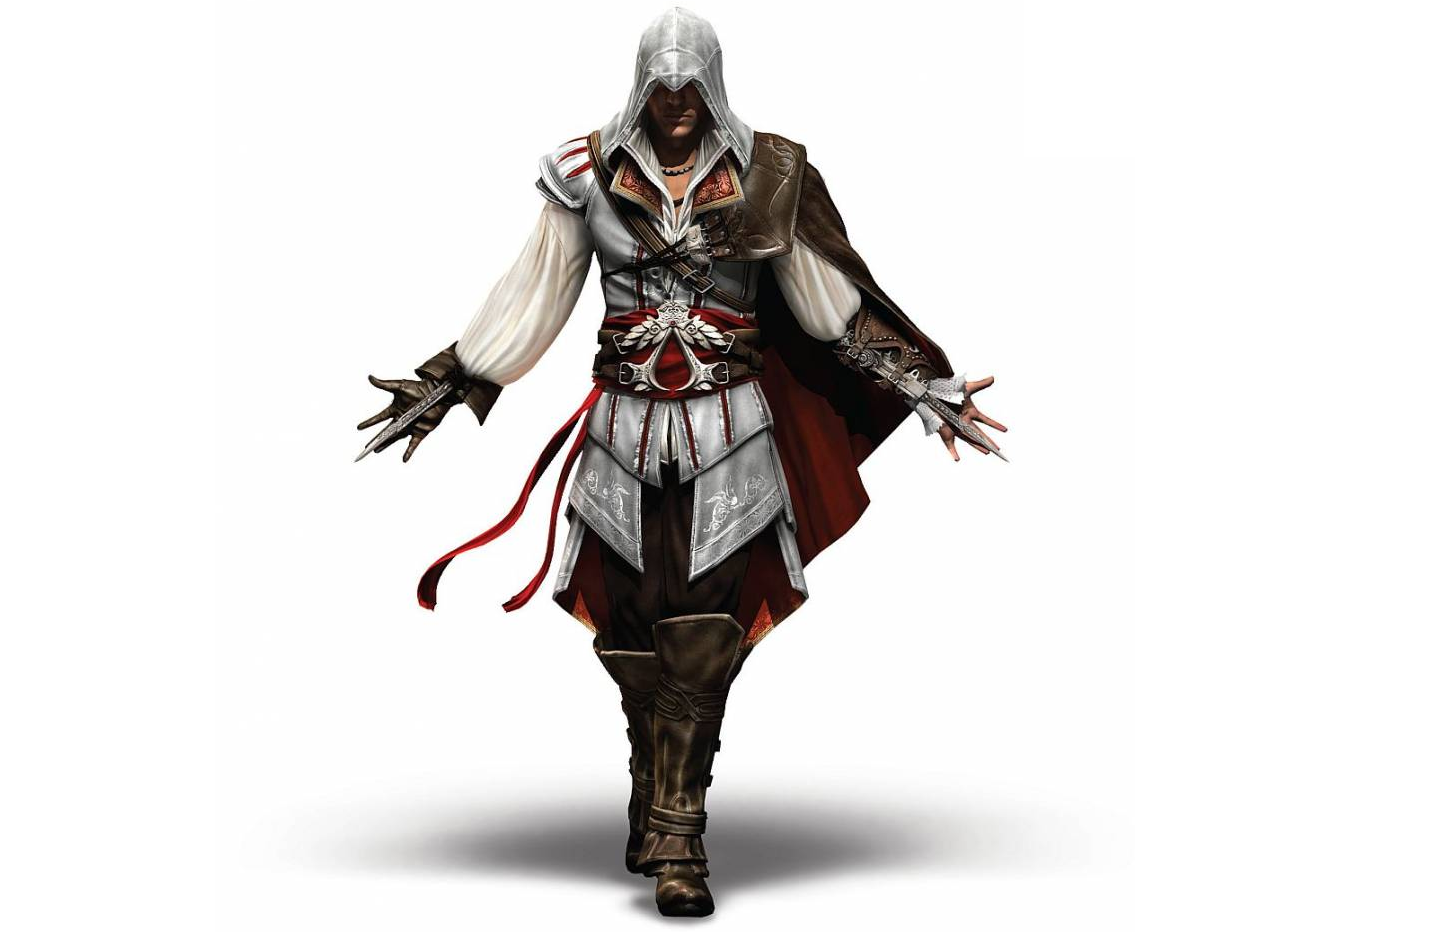 General 1434x932 Assassin's Creed video games video game art simple background video game men white background